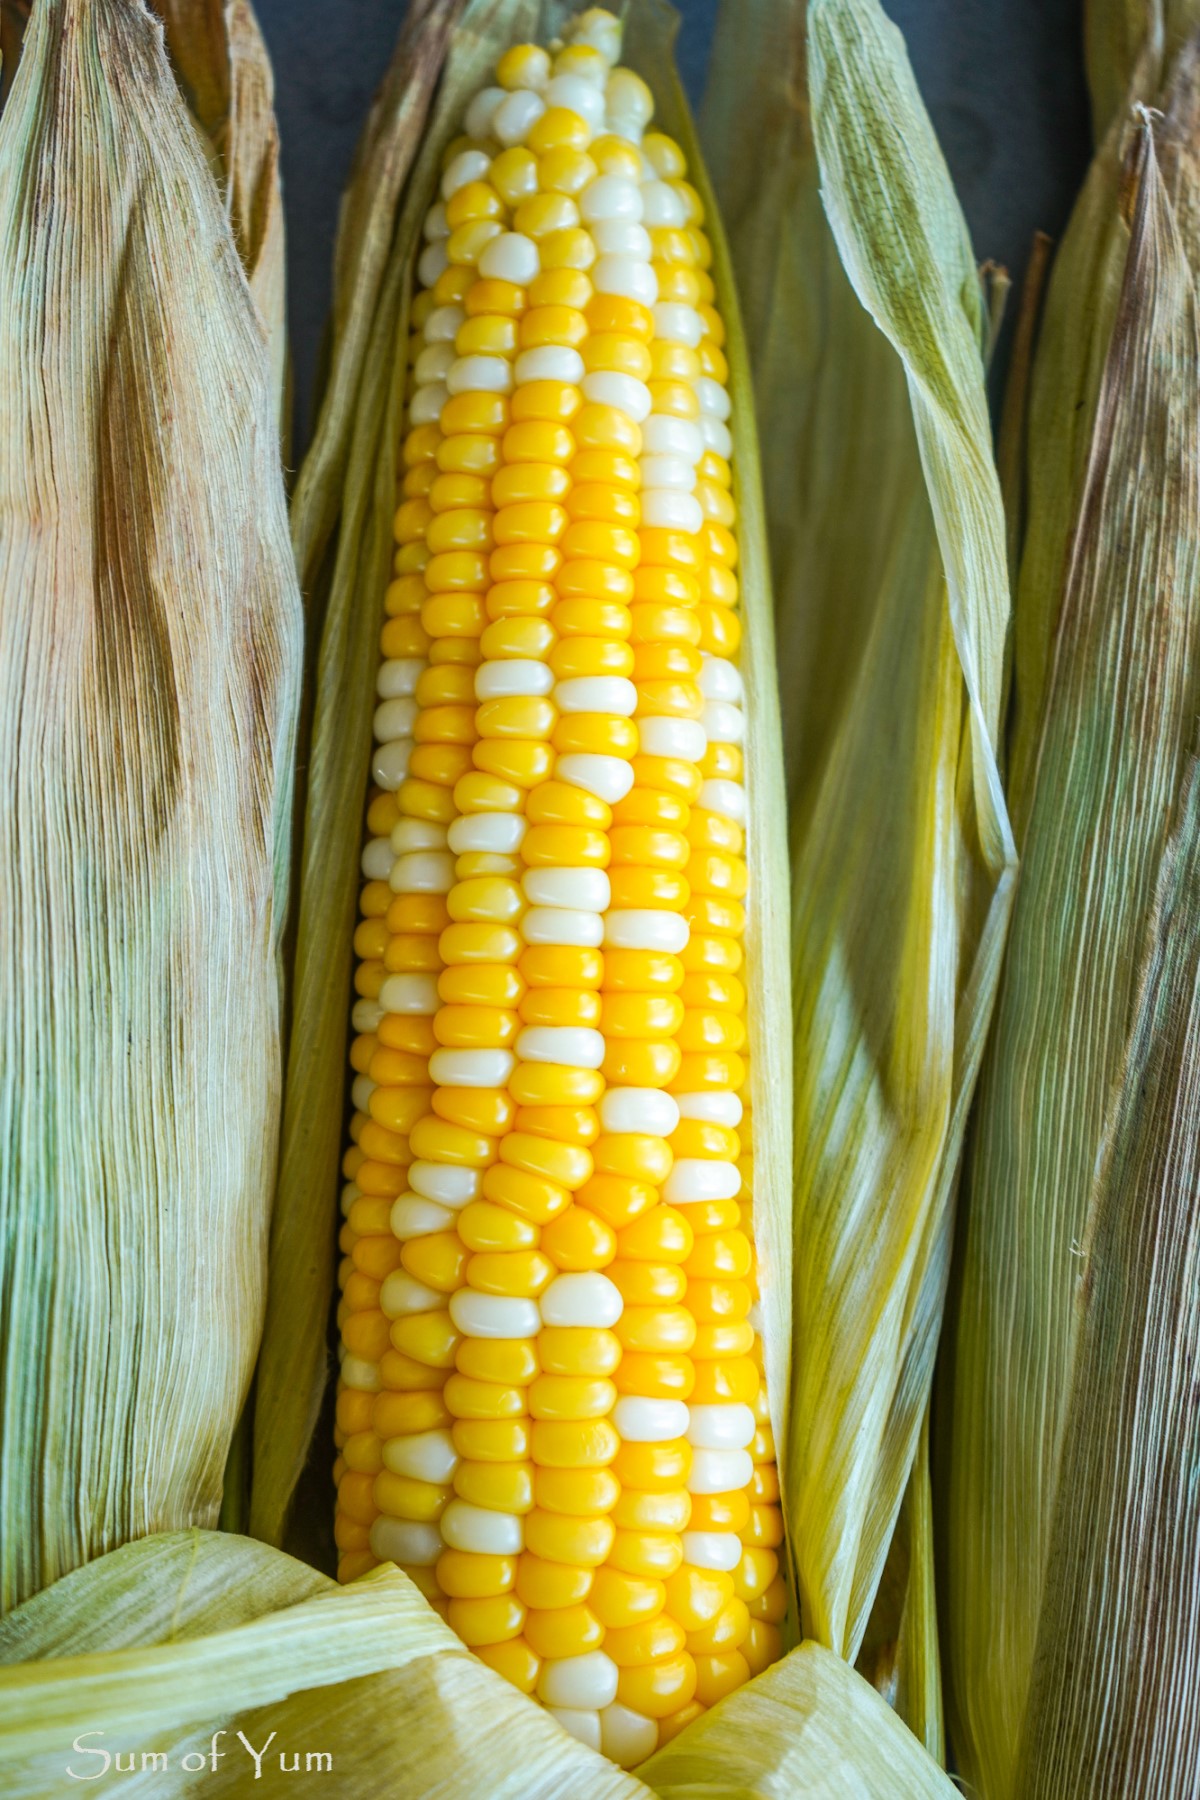 Boiled-in-the-Husk Corn on the Cob